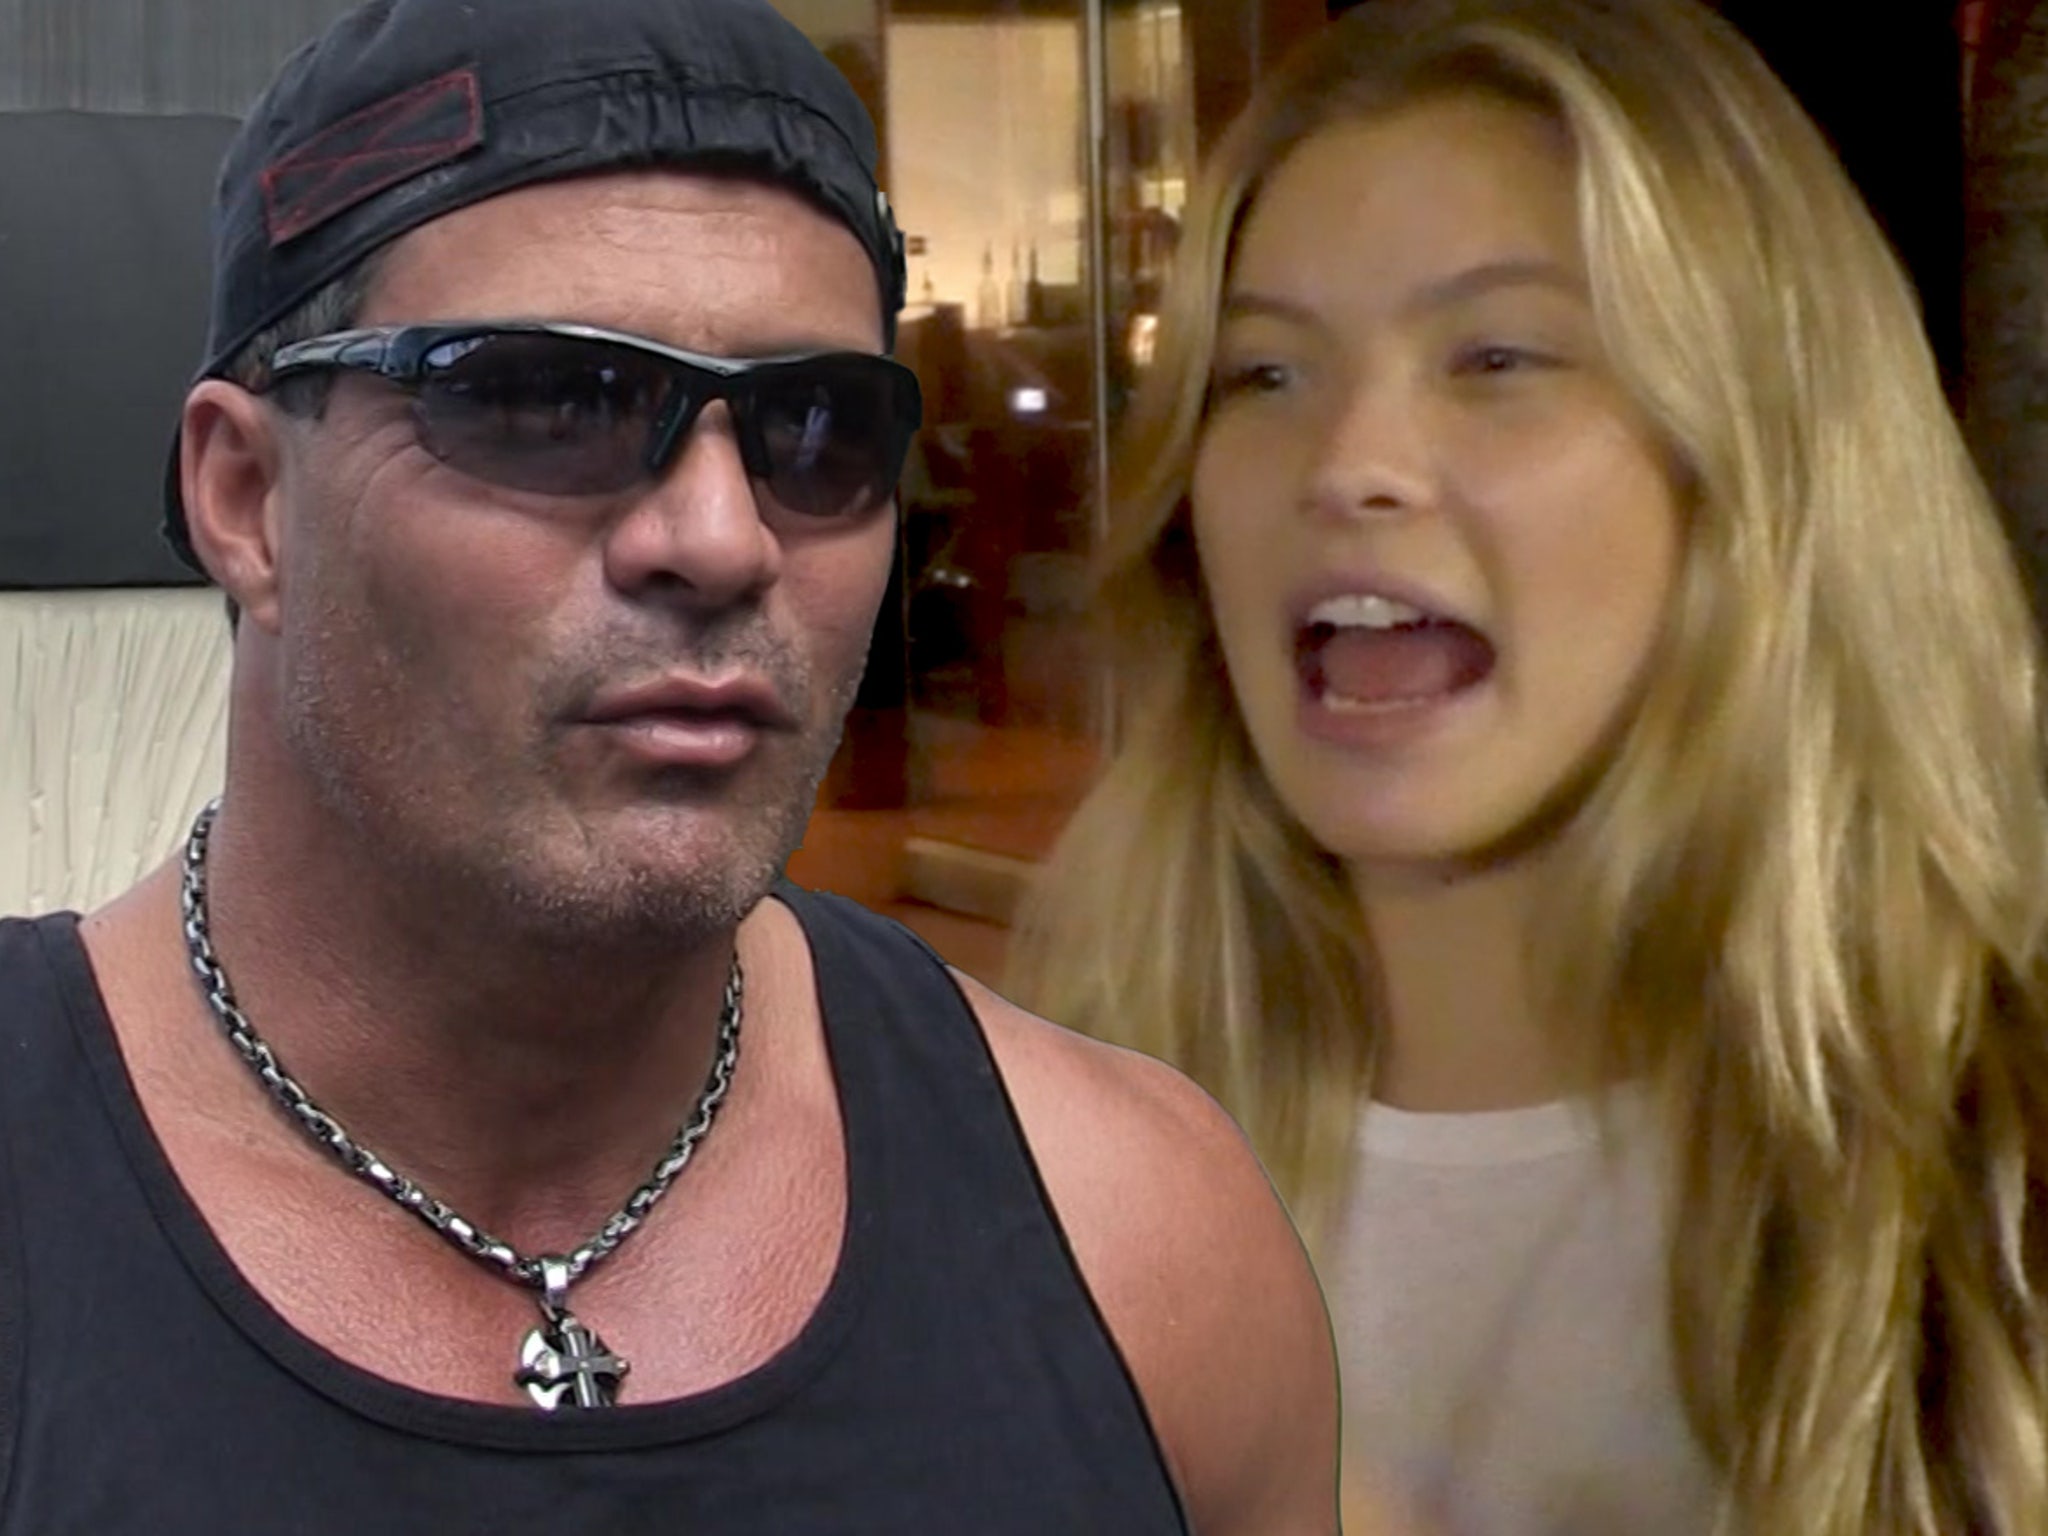 Look: Jose Canseco's Daughter Is Making Headlines, The Spun